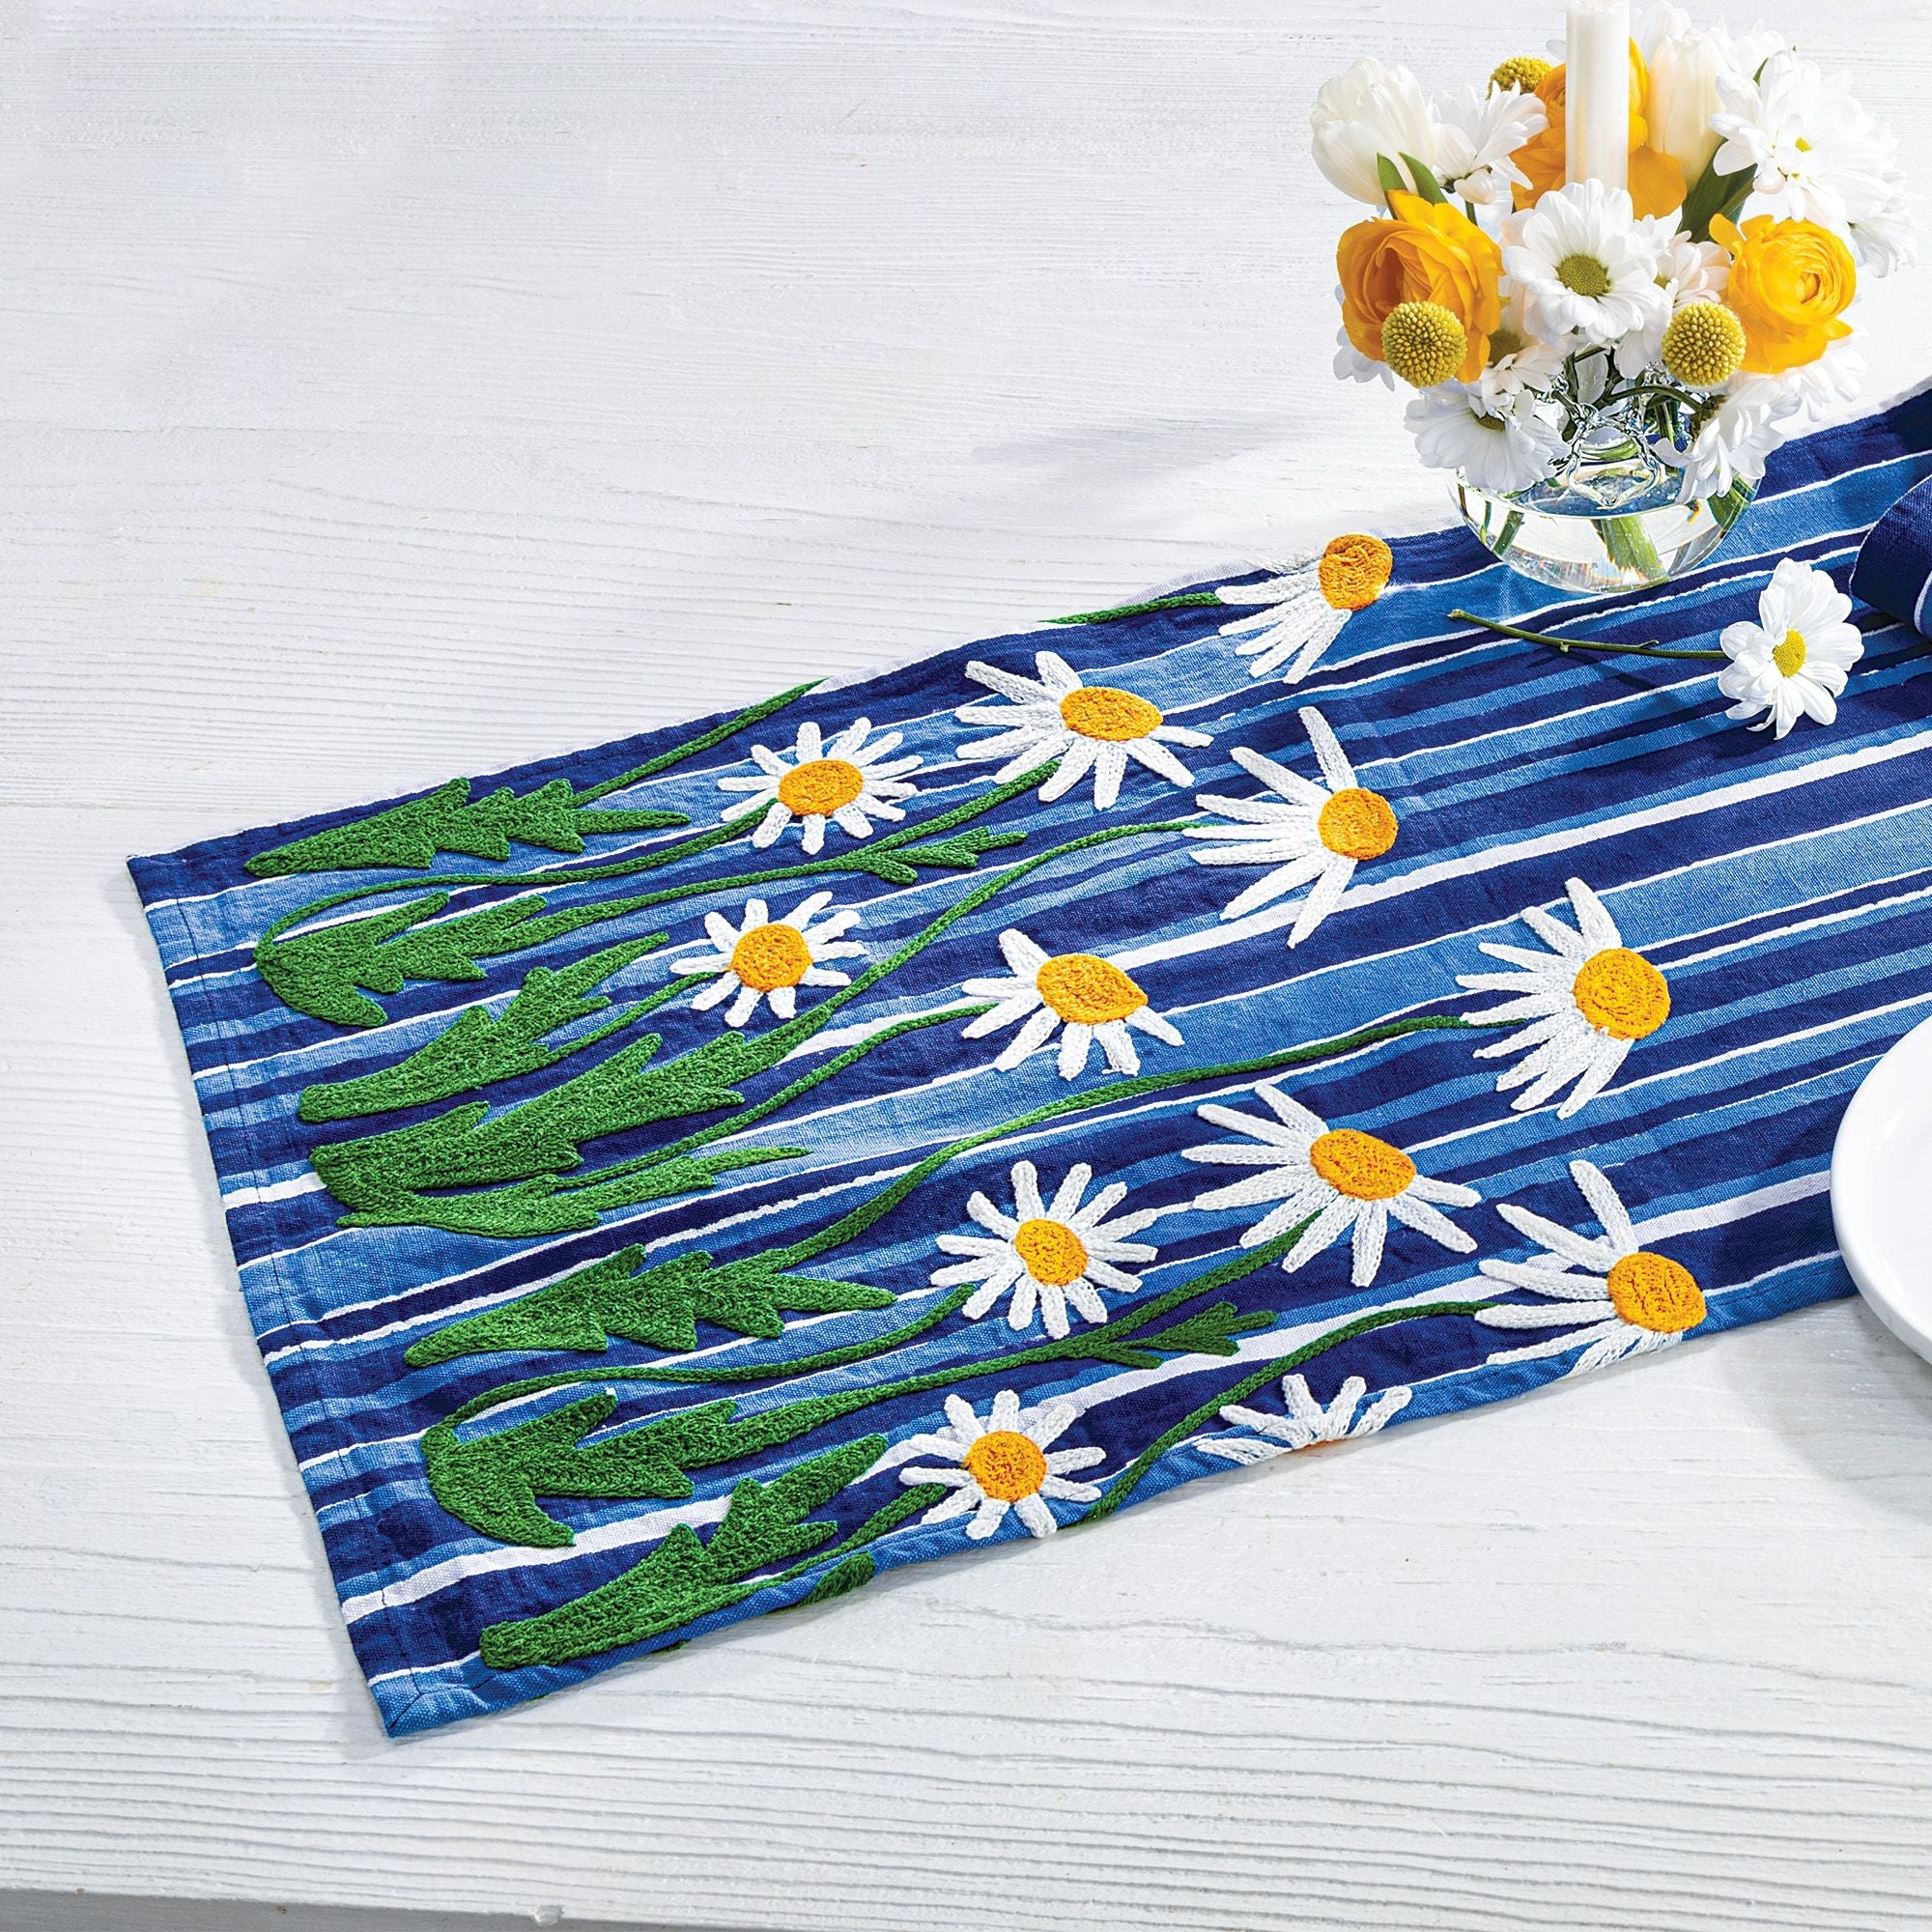 Dancing Daisies Cotton Table Runner